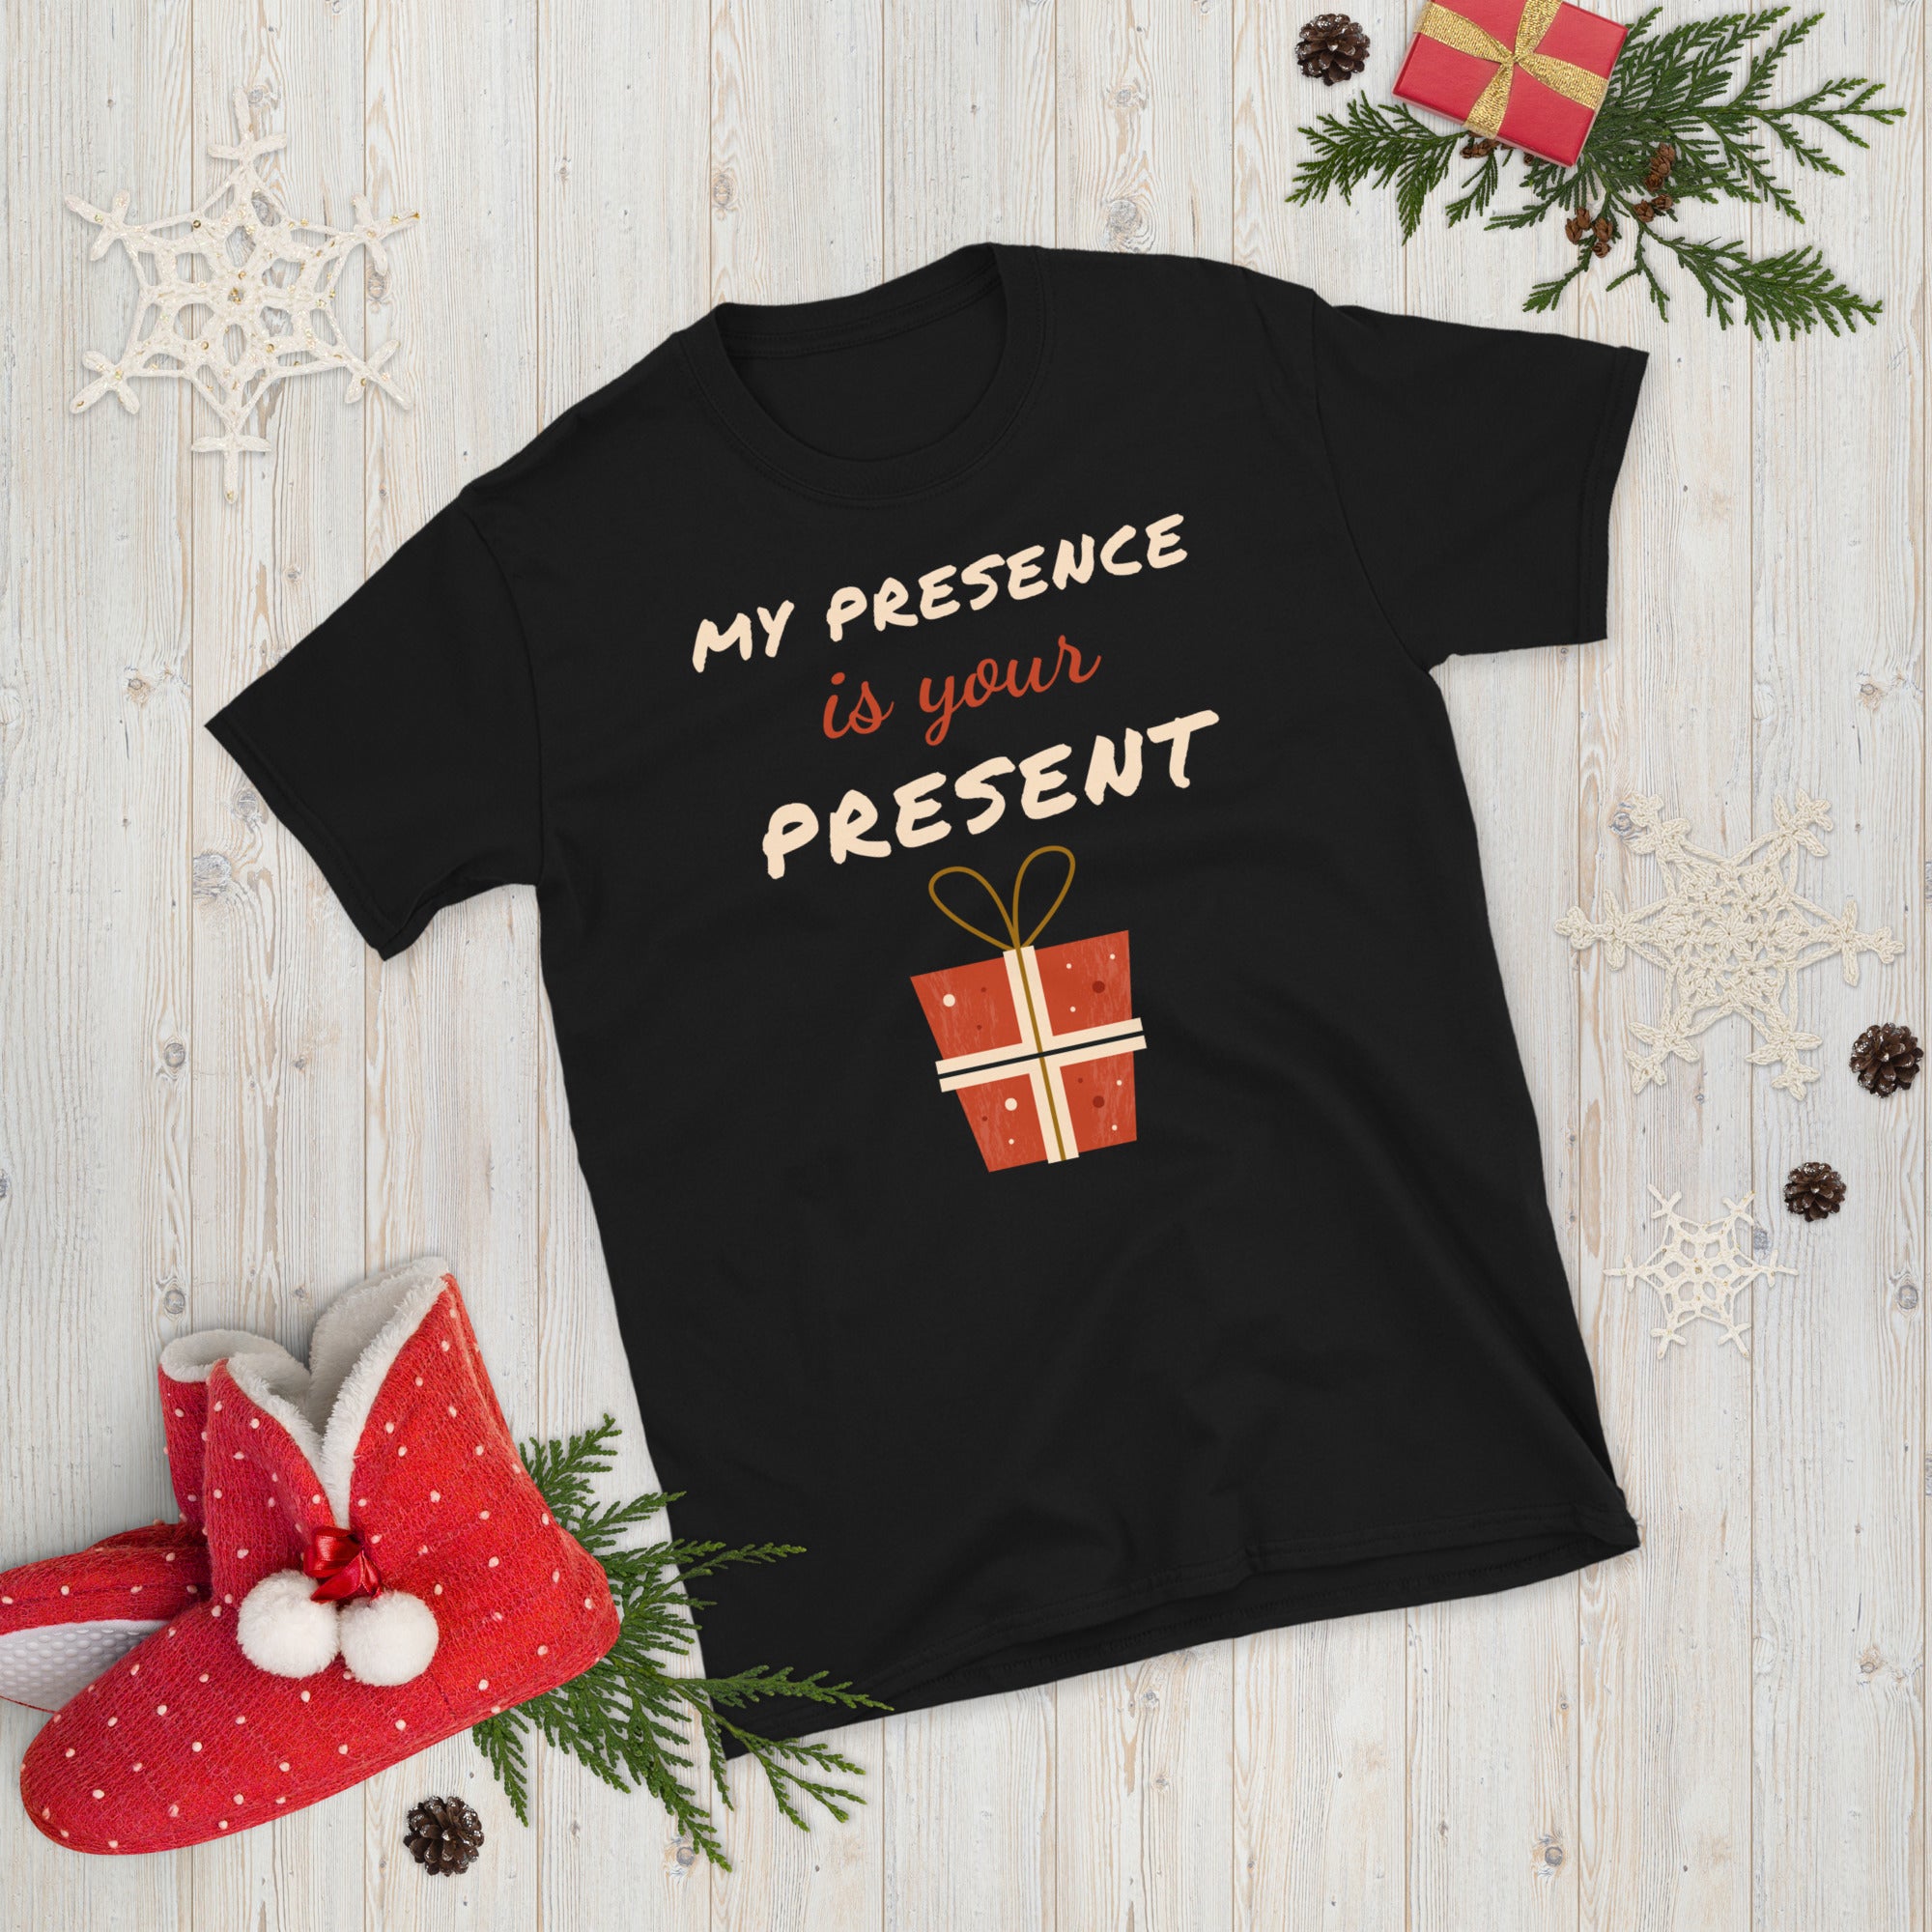 My Presence Is Your Present Shirt, Christmas Shirt for Women, Merry and Bright Shirt, Funny Christmas Shirt, Holiday Shirt, Christmas Pajama